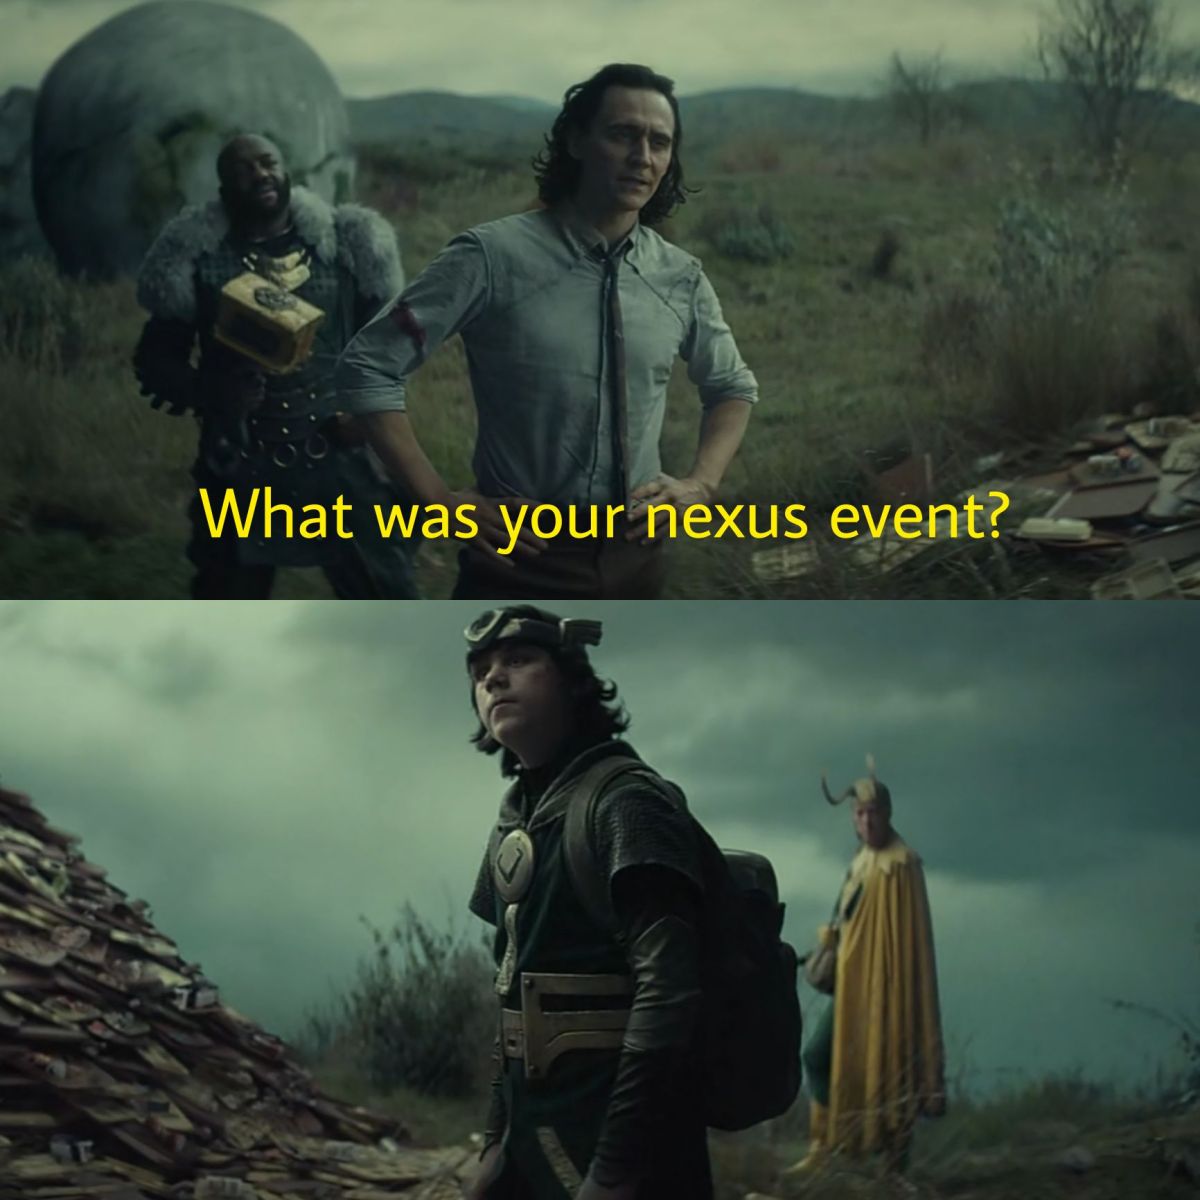 What was your nexus event?